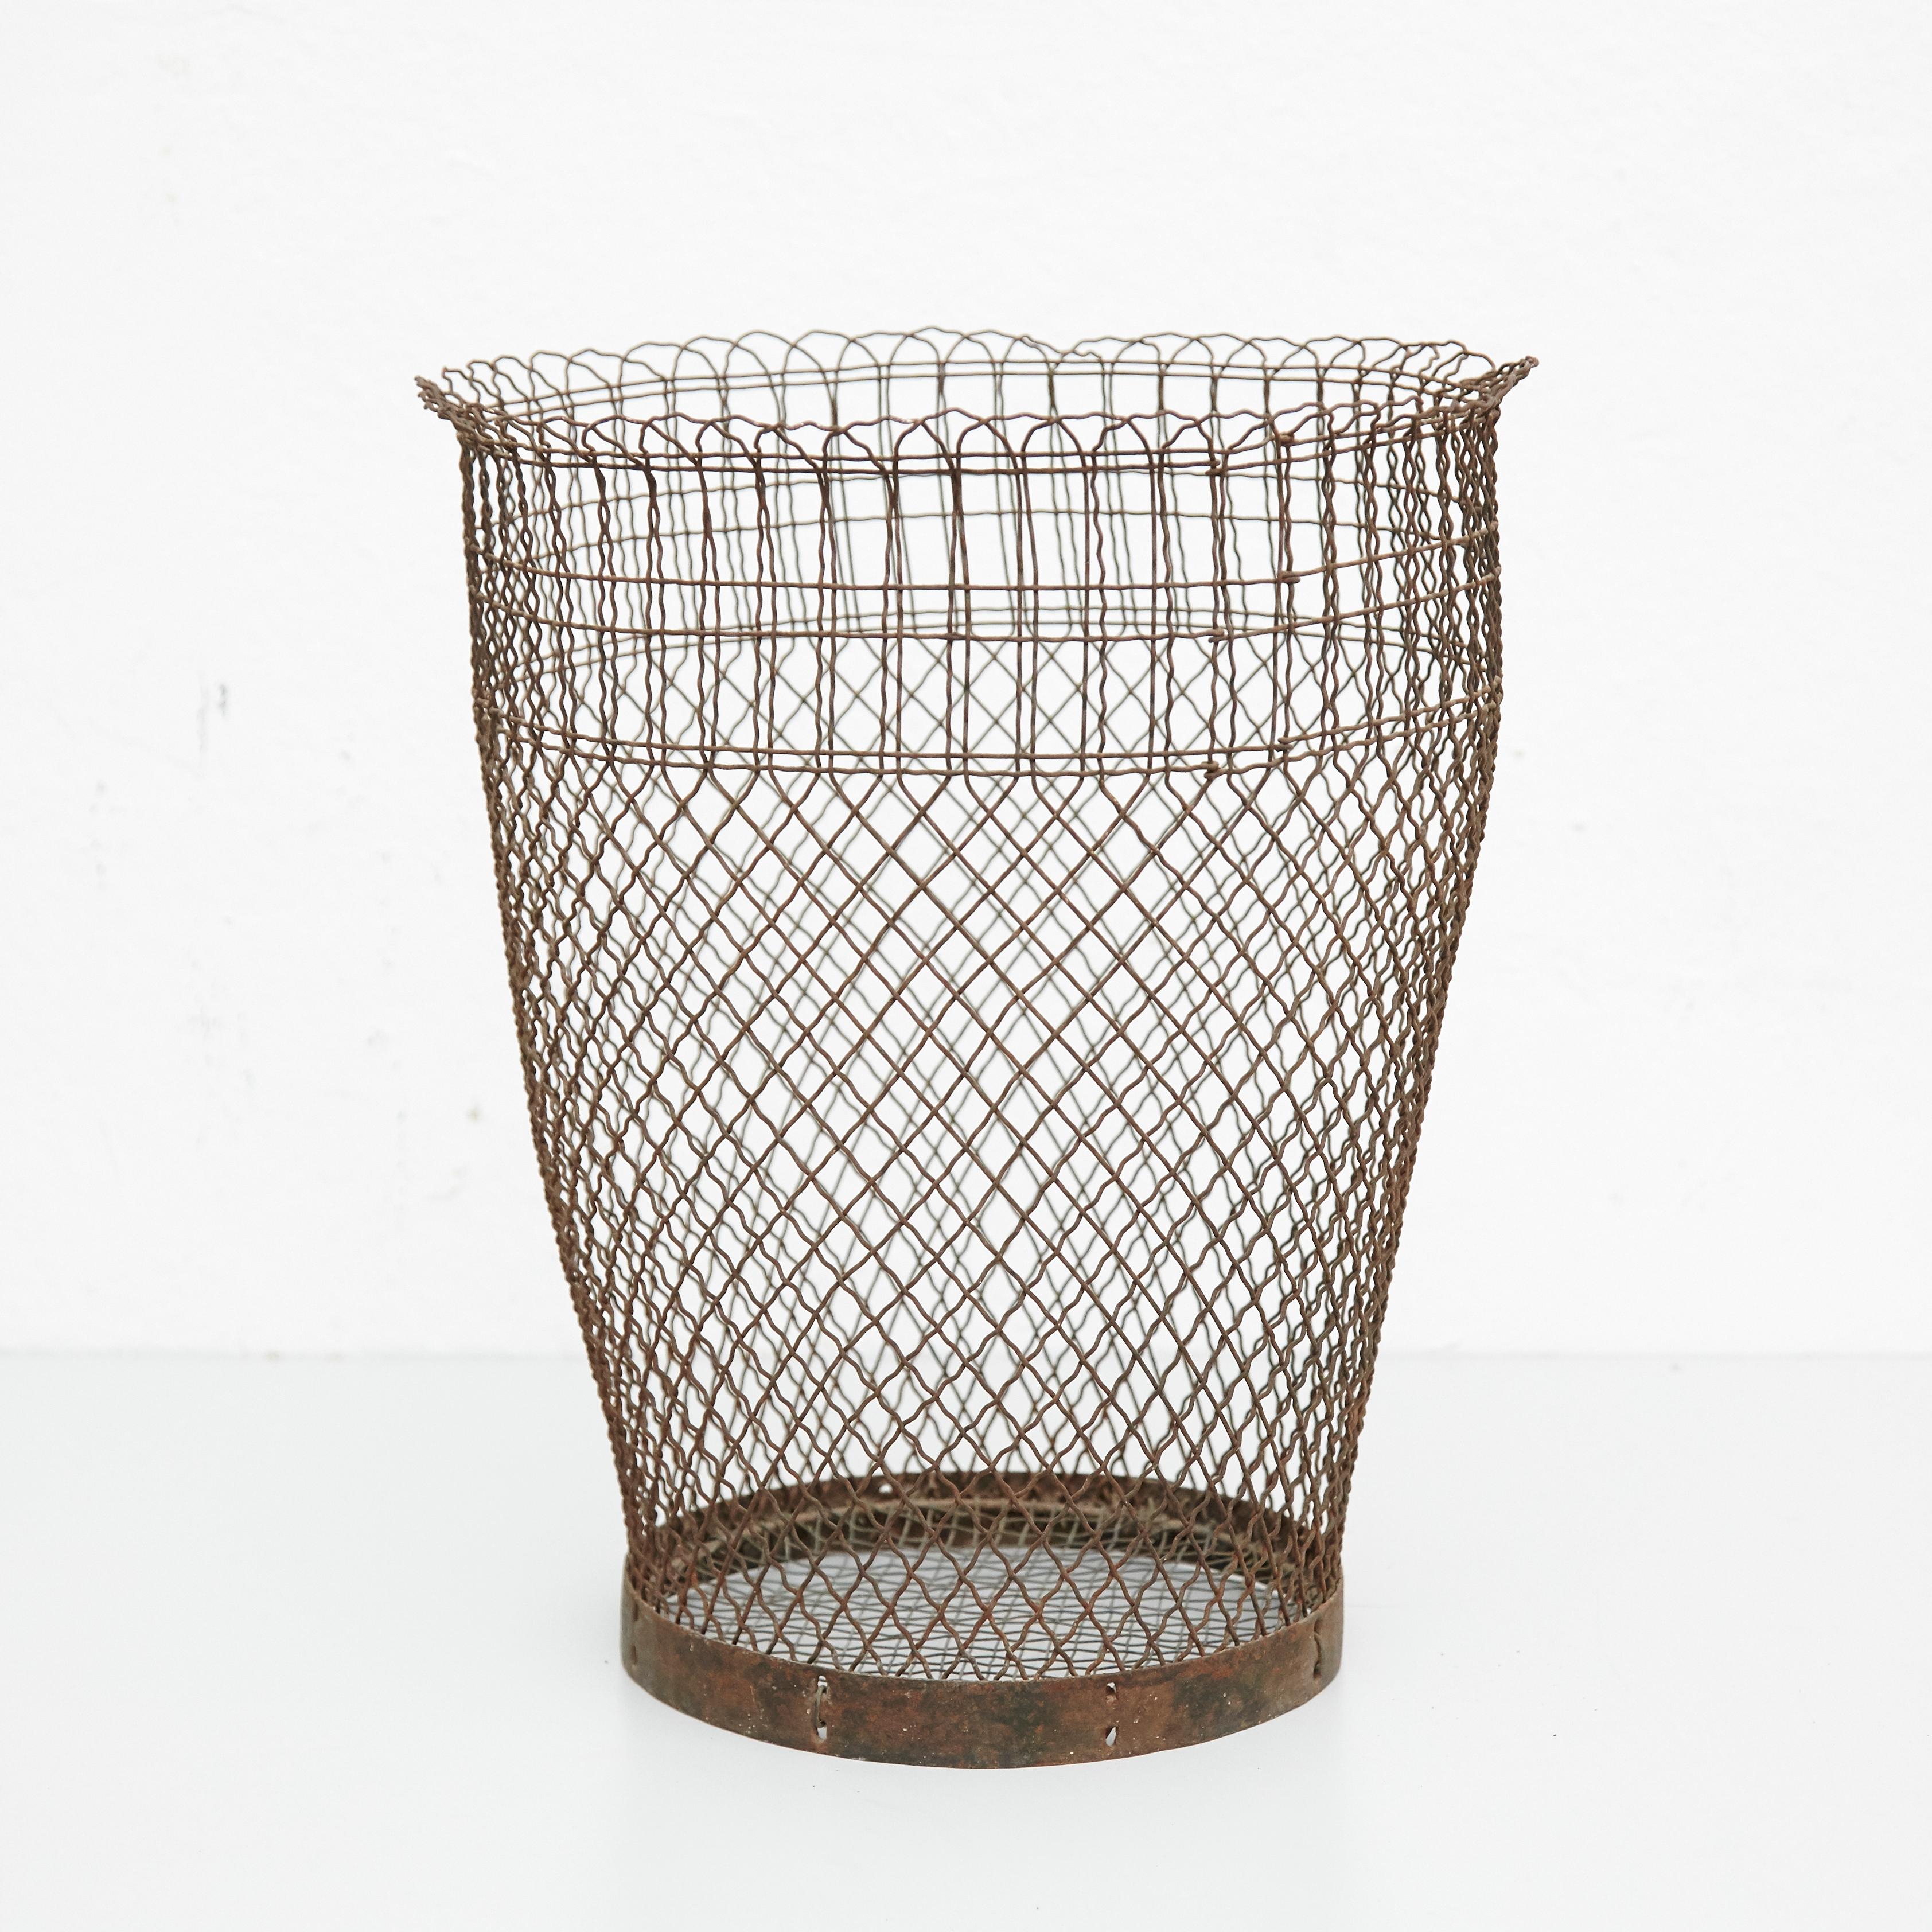 Metal paper bin made by wire woven in a Classic cross-hatched pattern completed by a solid ring. 
Unknown manufacturer, France,
circa 1940

Materials:
Metal

Dimensions: 
Diameter 30 x 35 height cm

In original condition, with minor wear